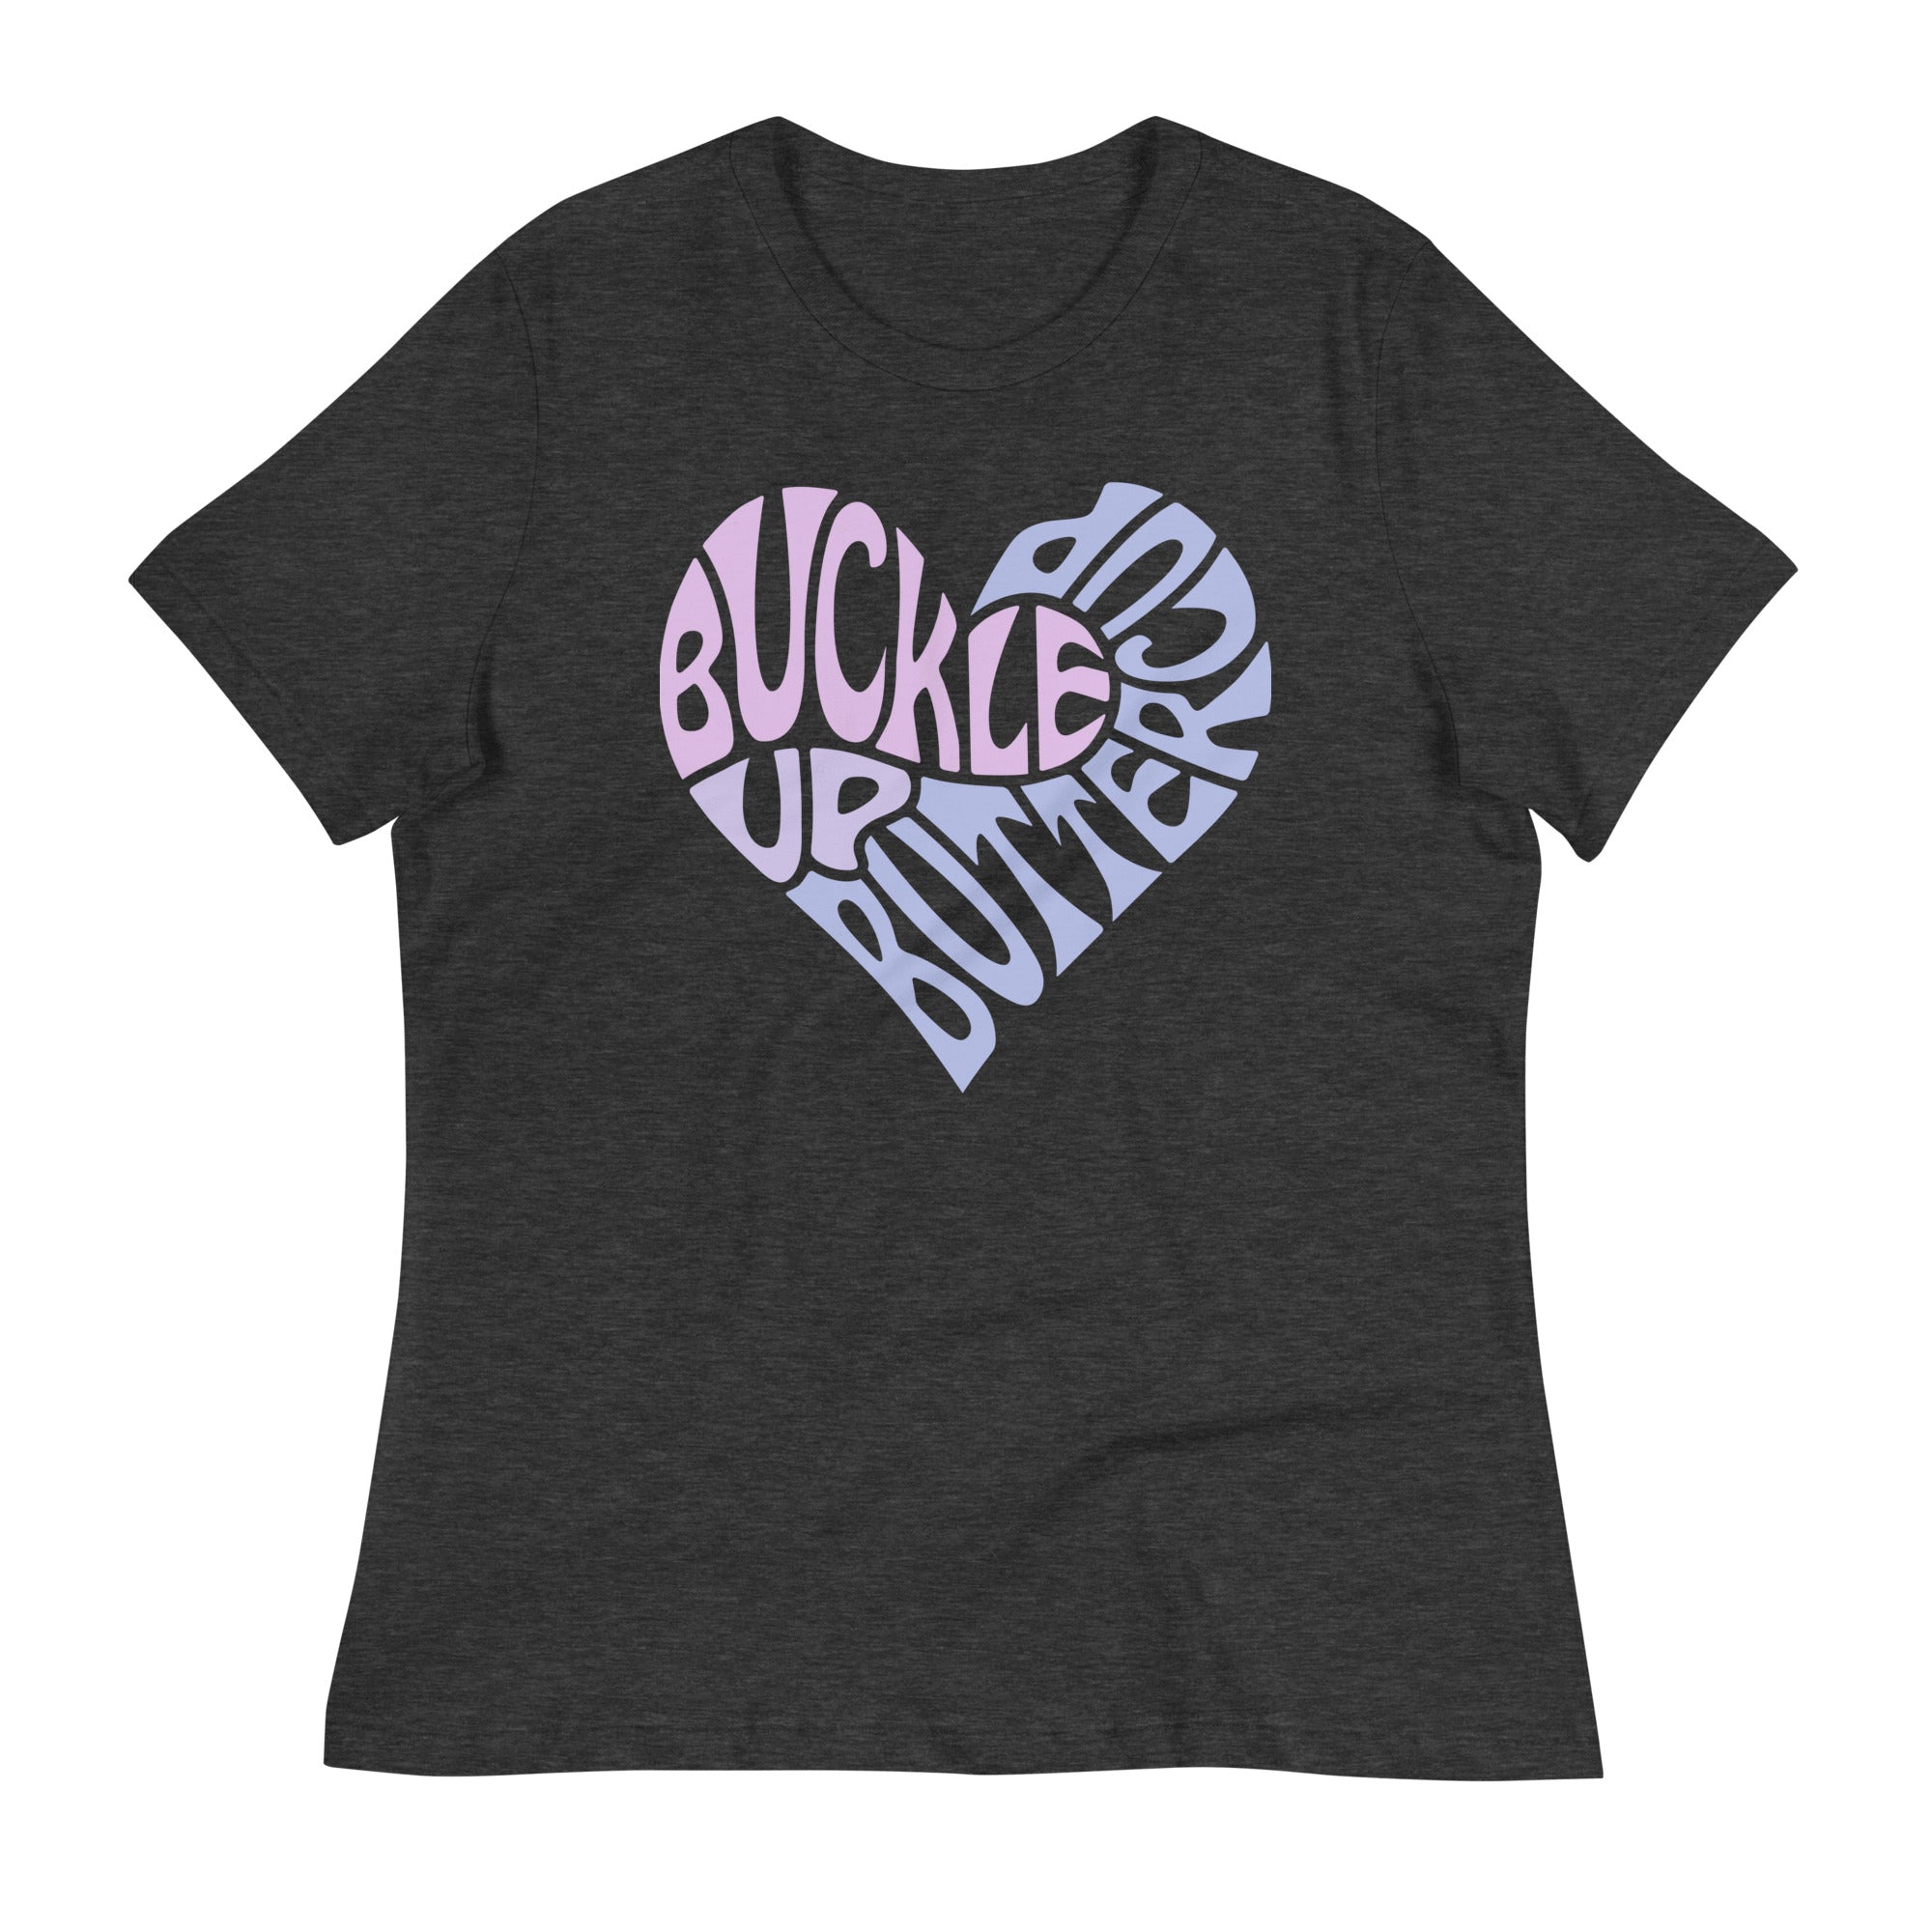 Buckle up buttercup typo tees for female - Lioness-love.com